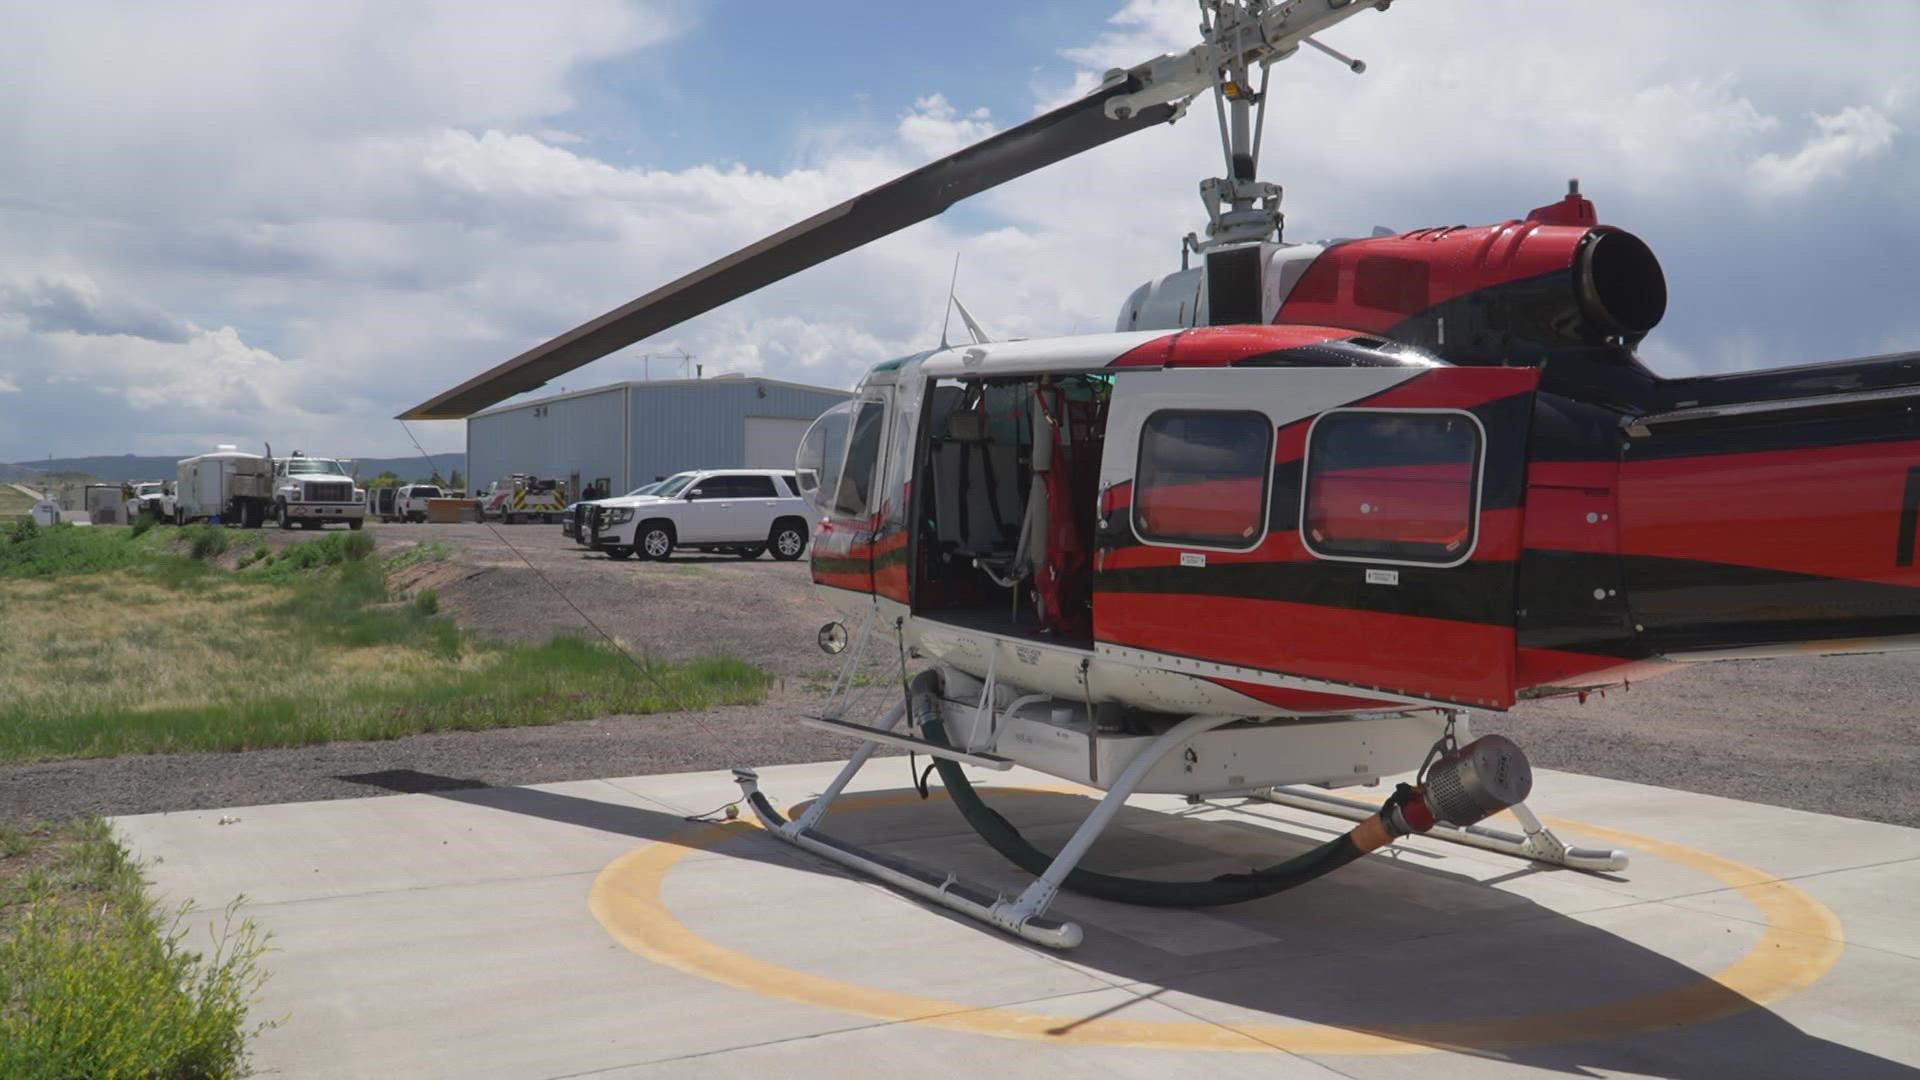 The county is leasing a firefighting helicopter for nearly half a year so it doesn't have to rely on state or federal agencies. Here's 9news reporter Noel Brennan.